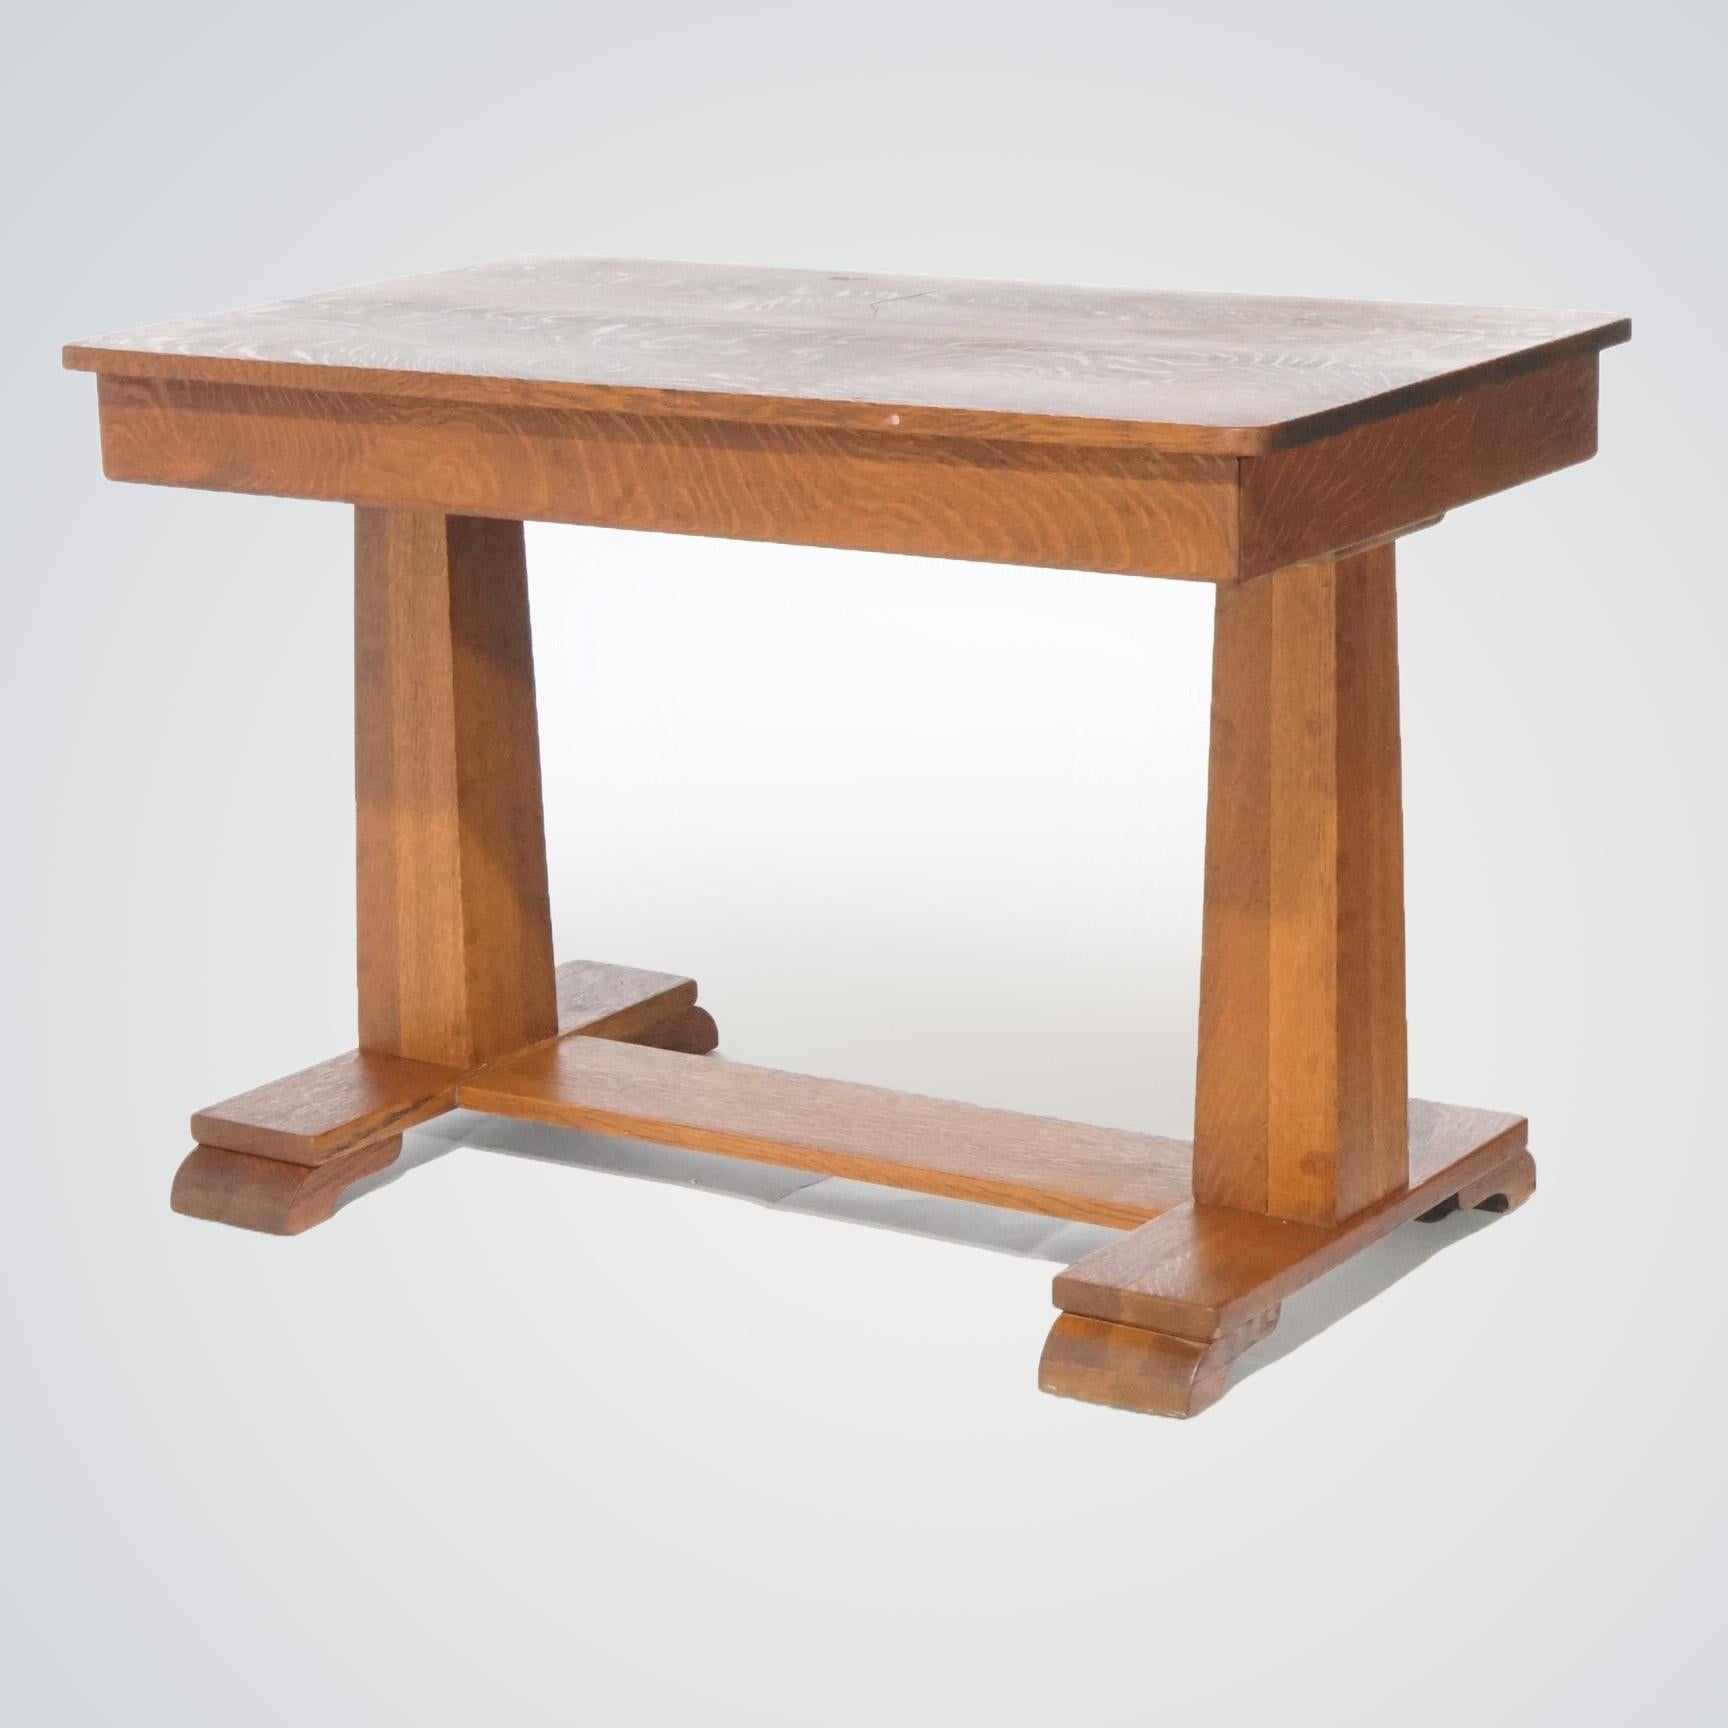 American Antique Arts & Crafts Mission Oak Library Table, circa 1910